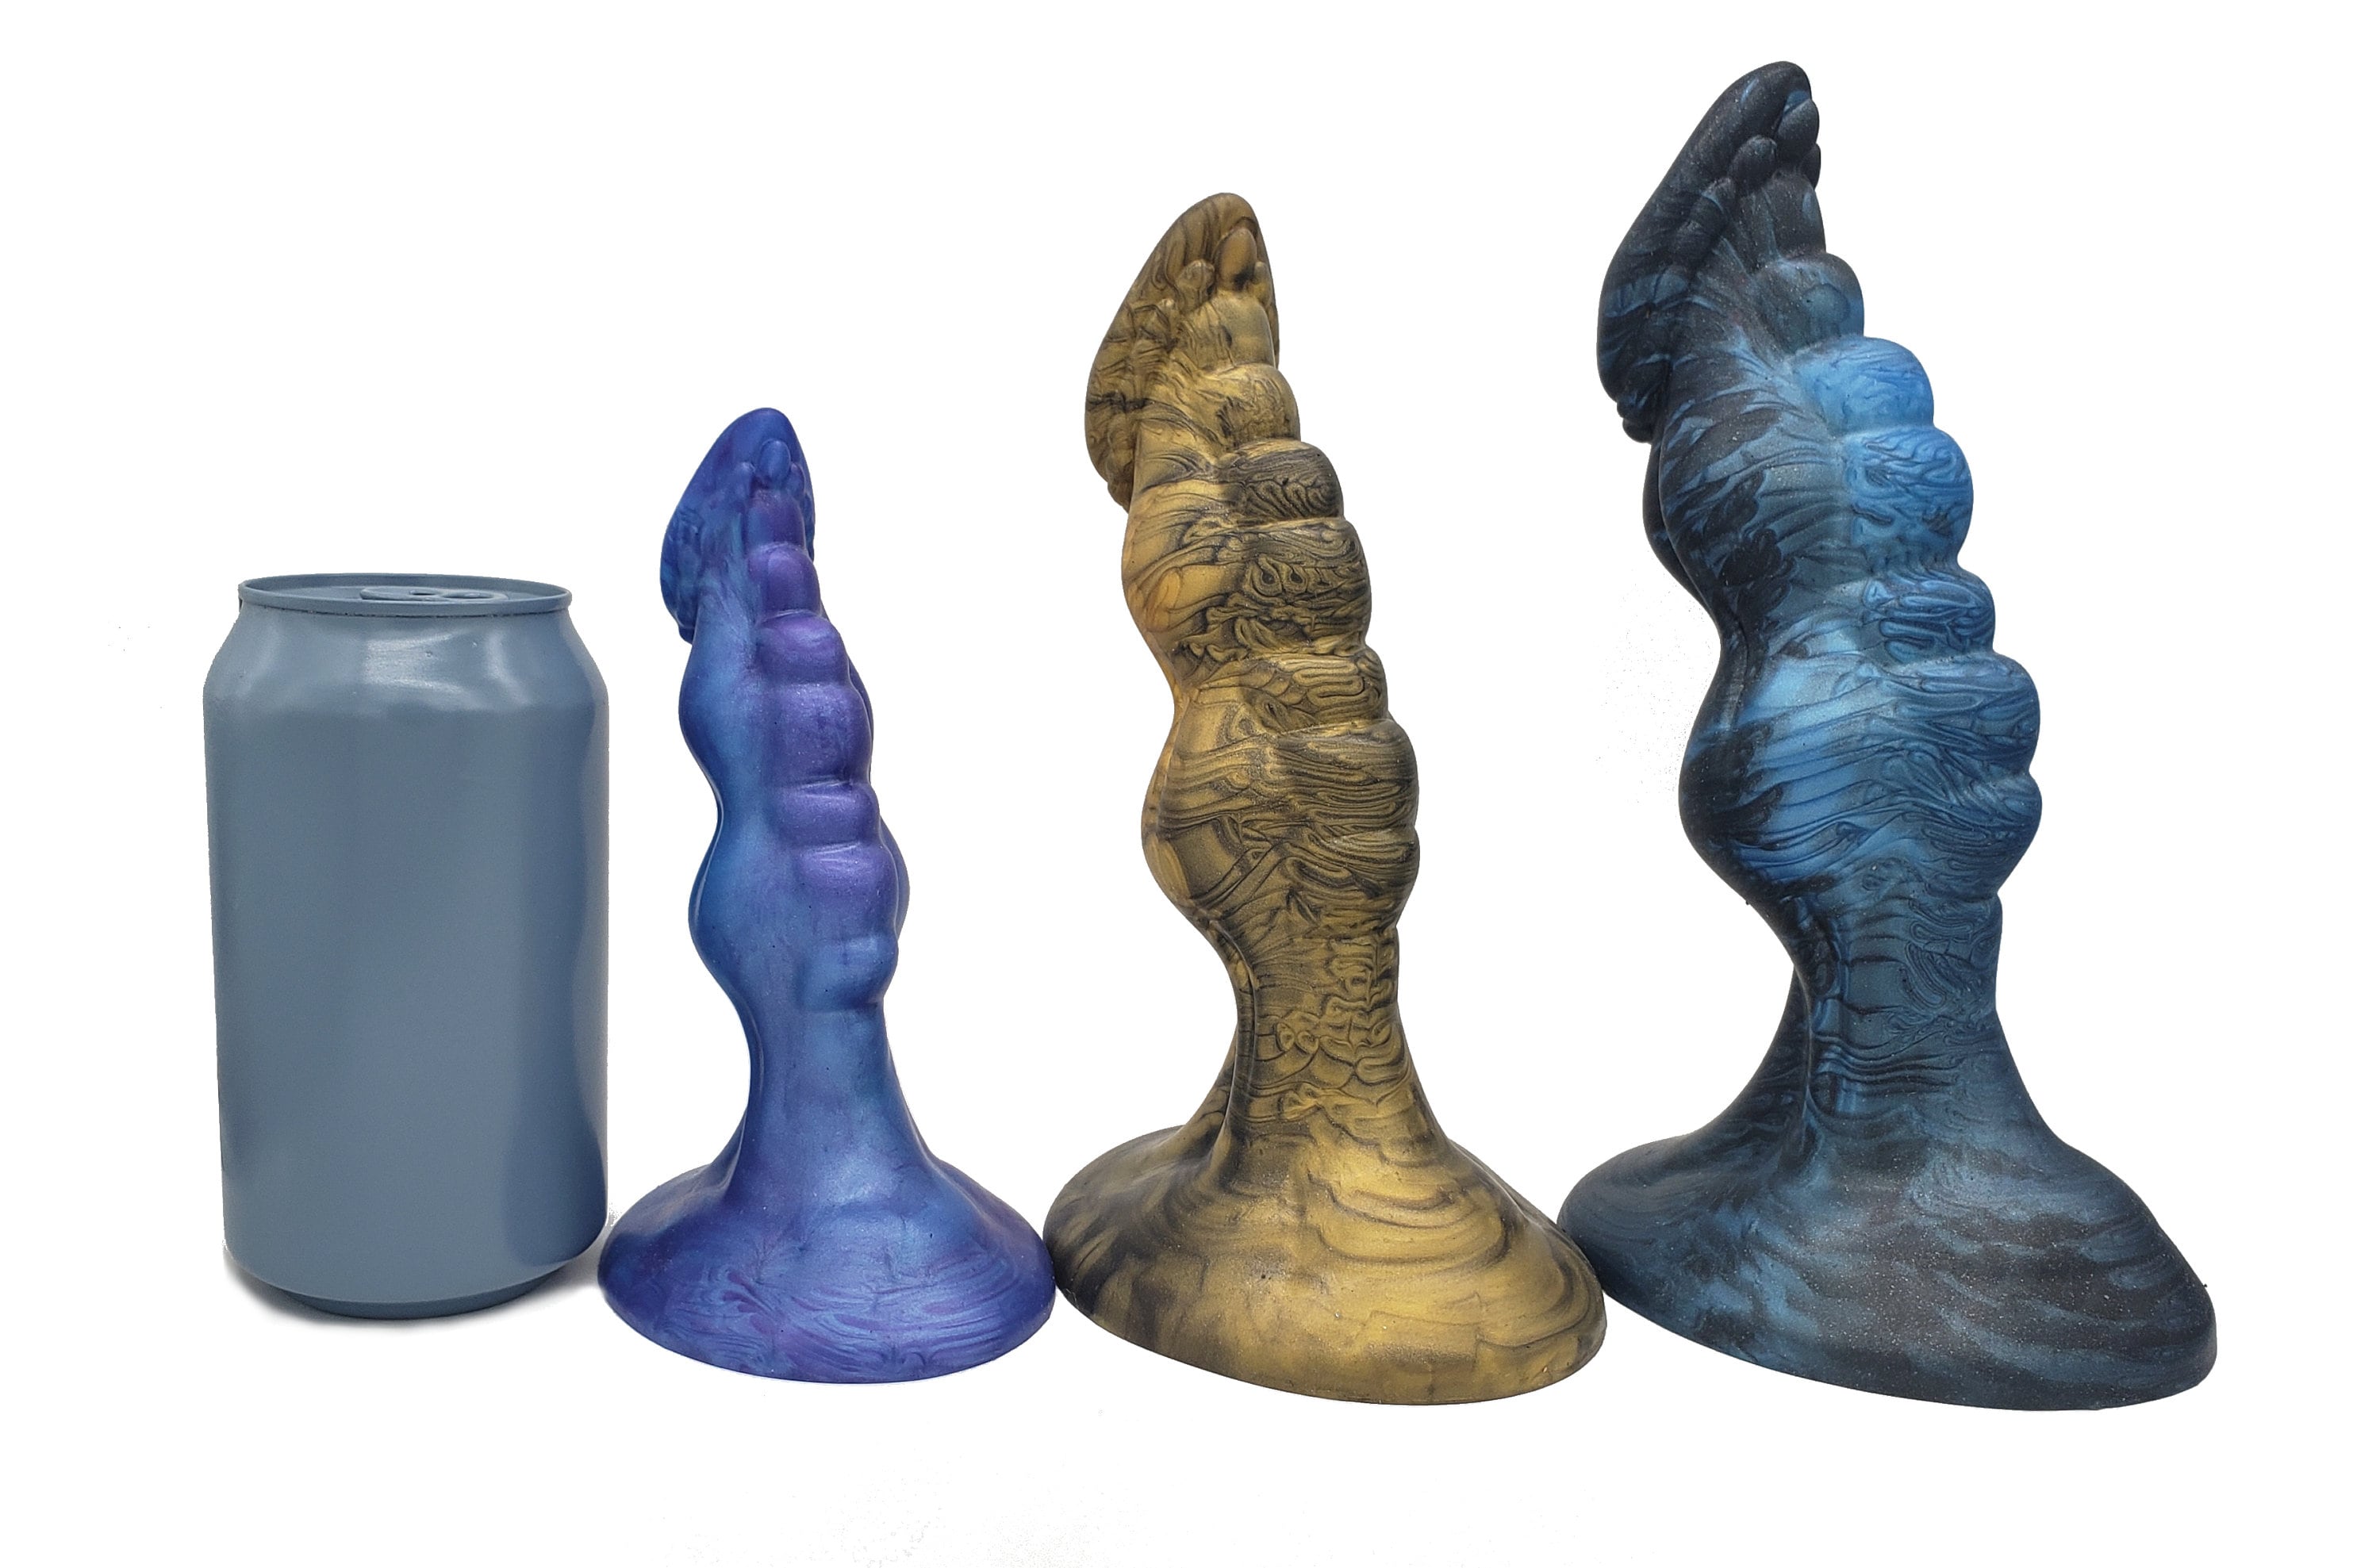 art brumley recommends Bad Dragon Knock Off